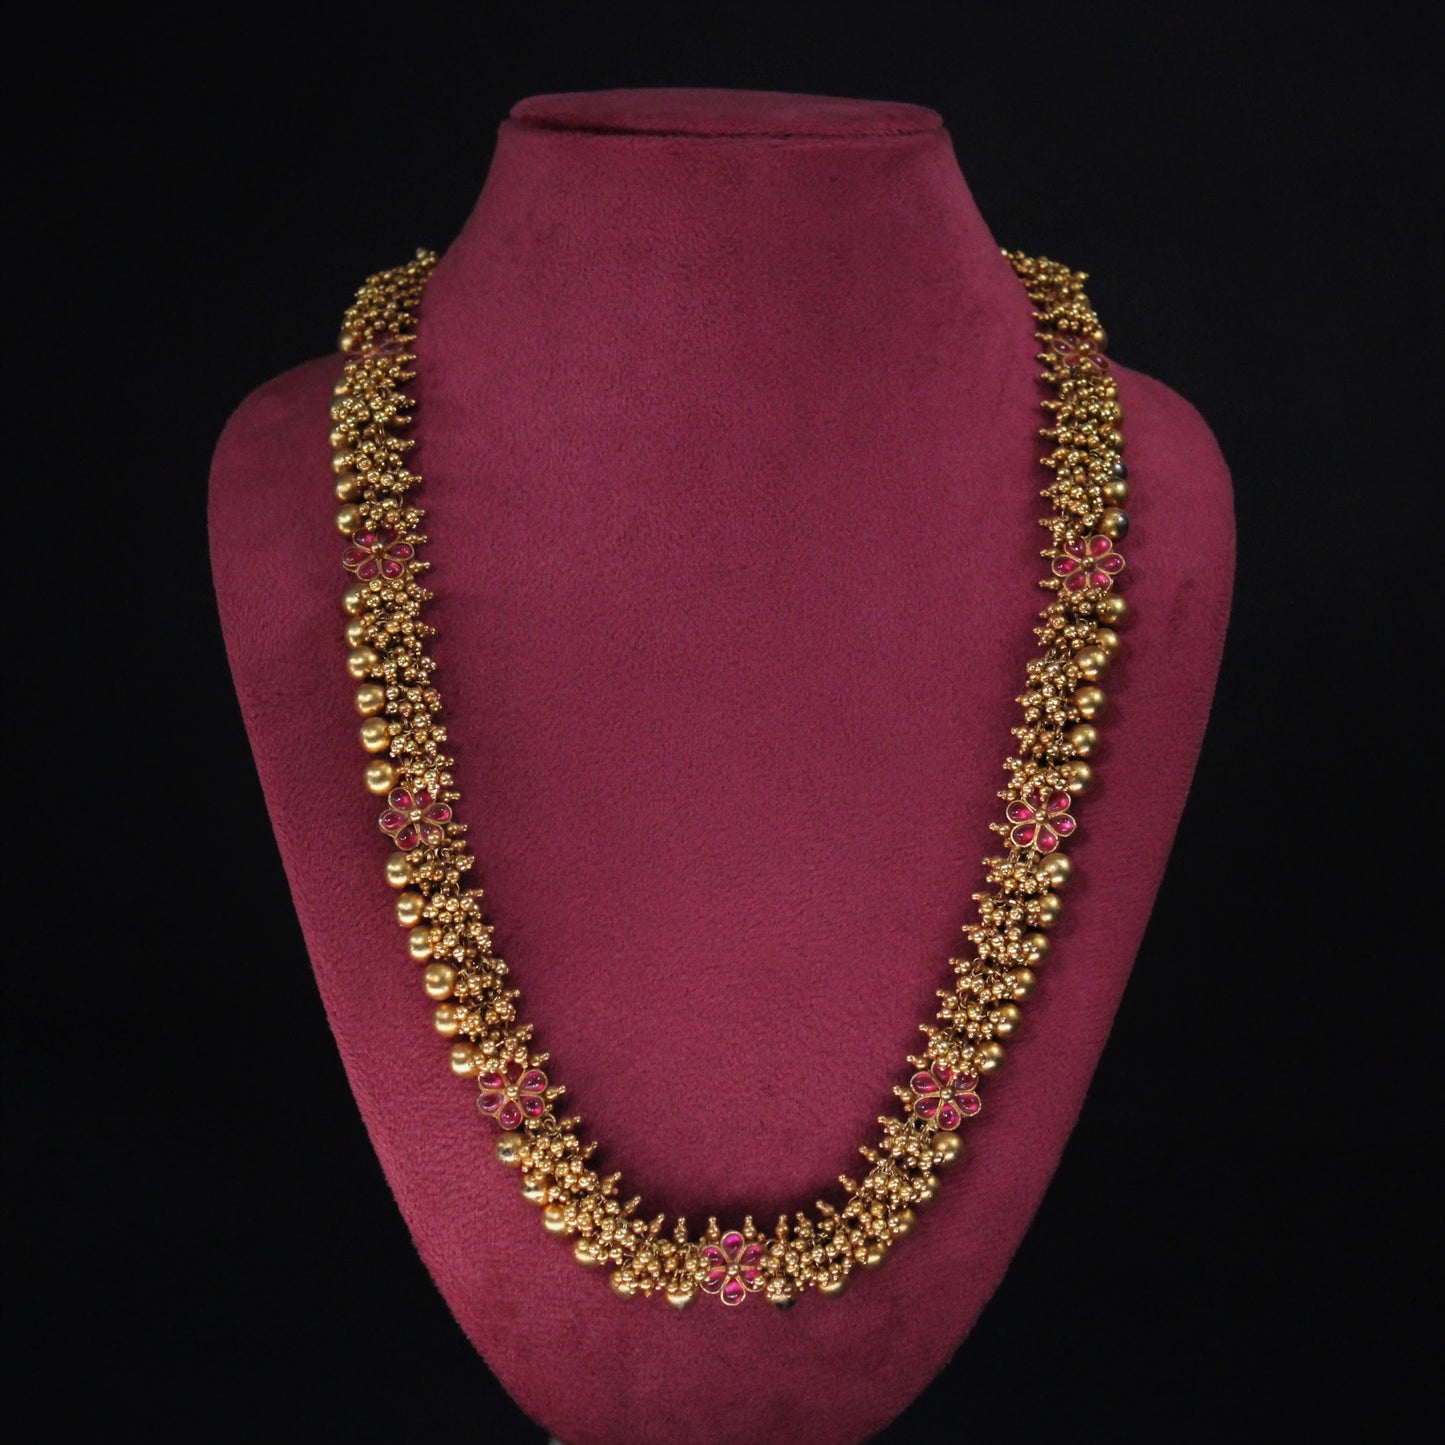 GOLD PLATED STERLING SILVER LONG NECKALCE IN SOUTH COLLECTIONS.